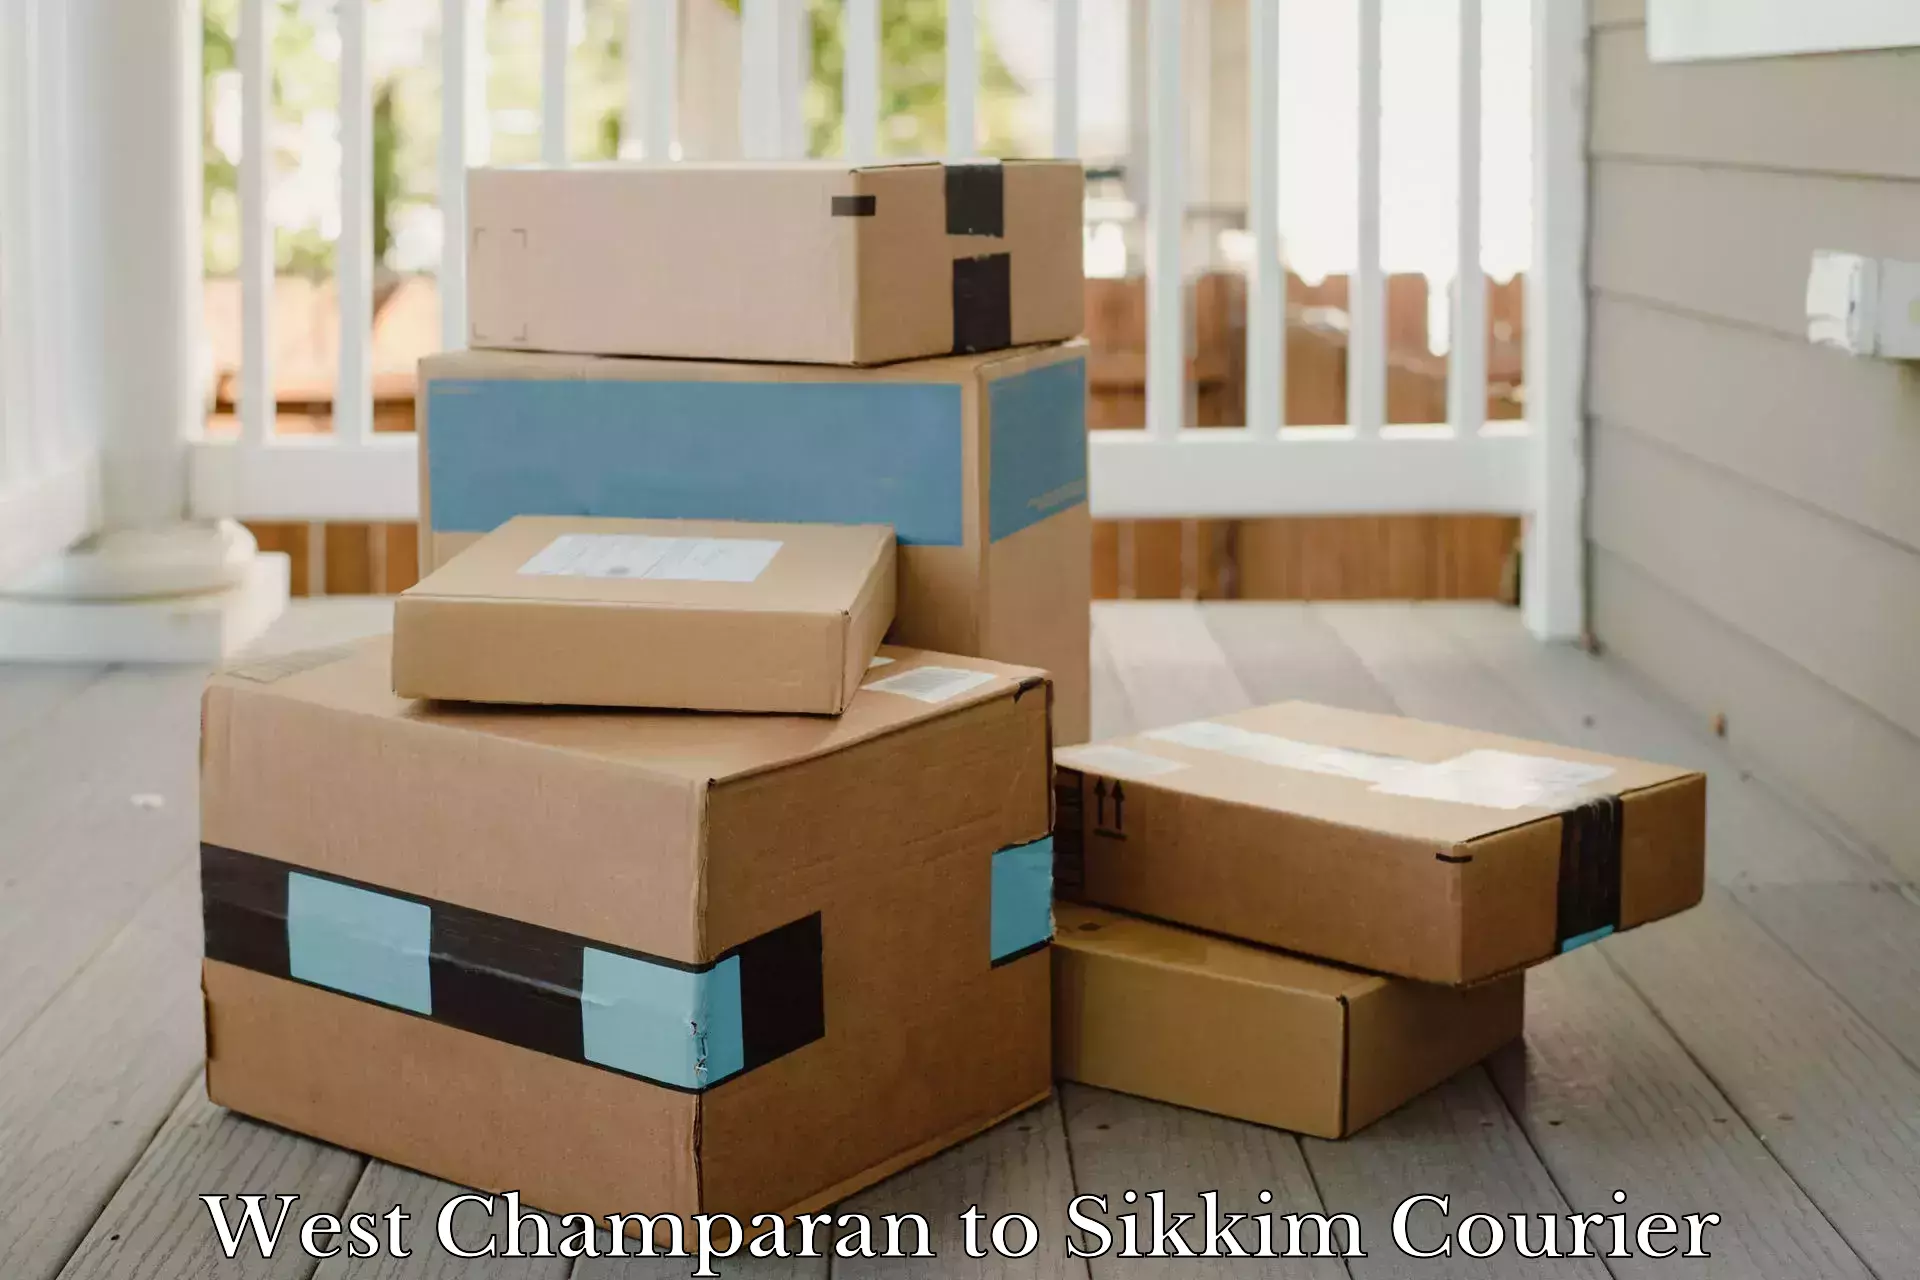 Logistics service provider West Champaran to South Sikkim